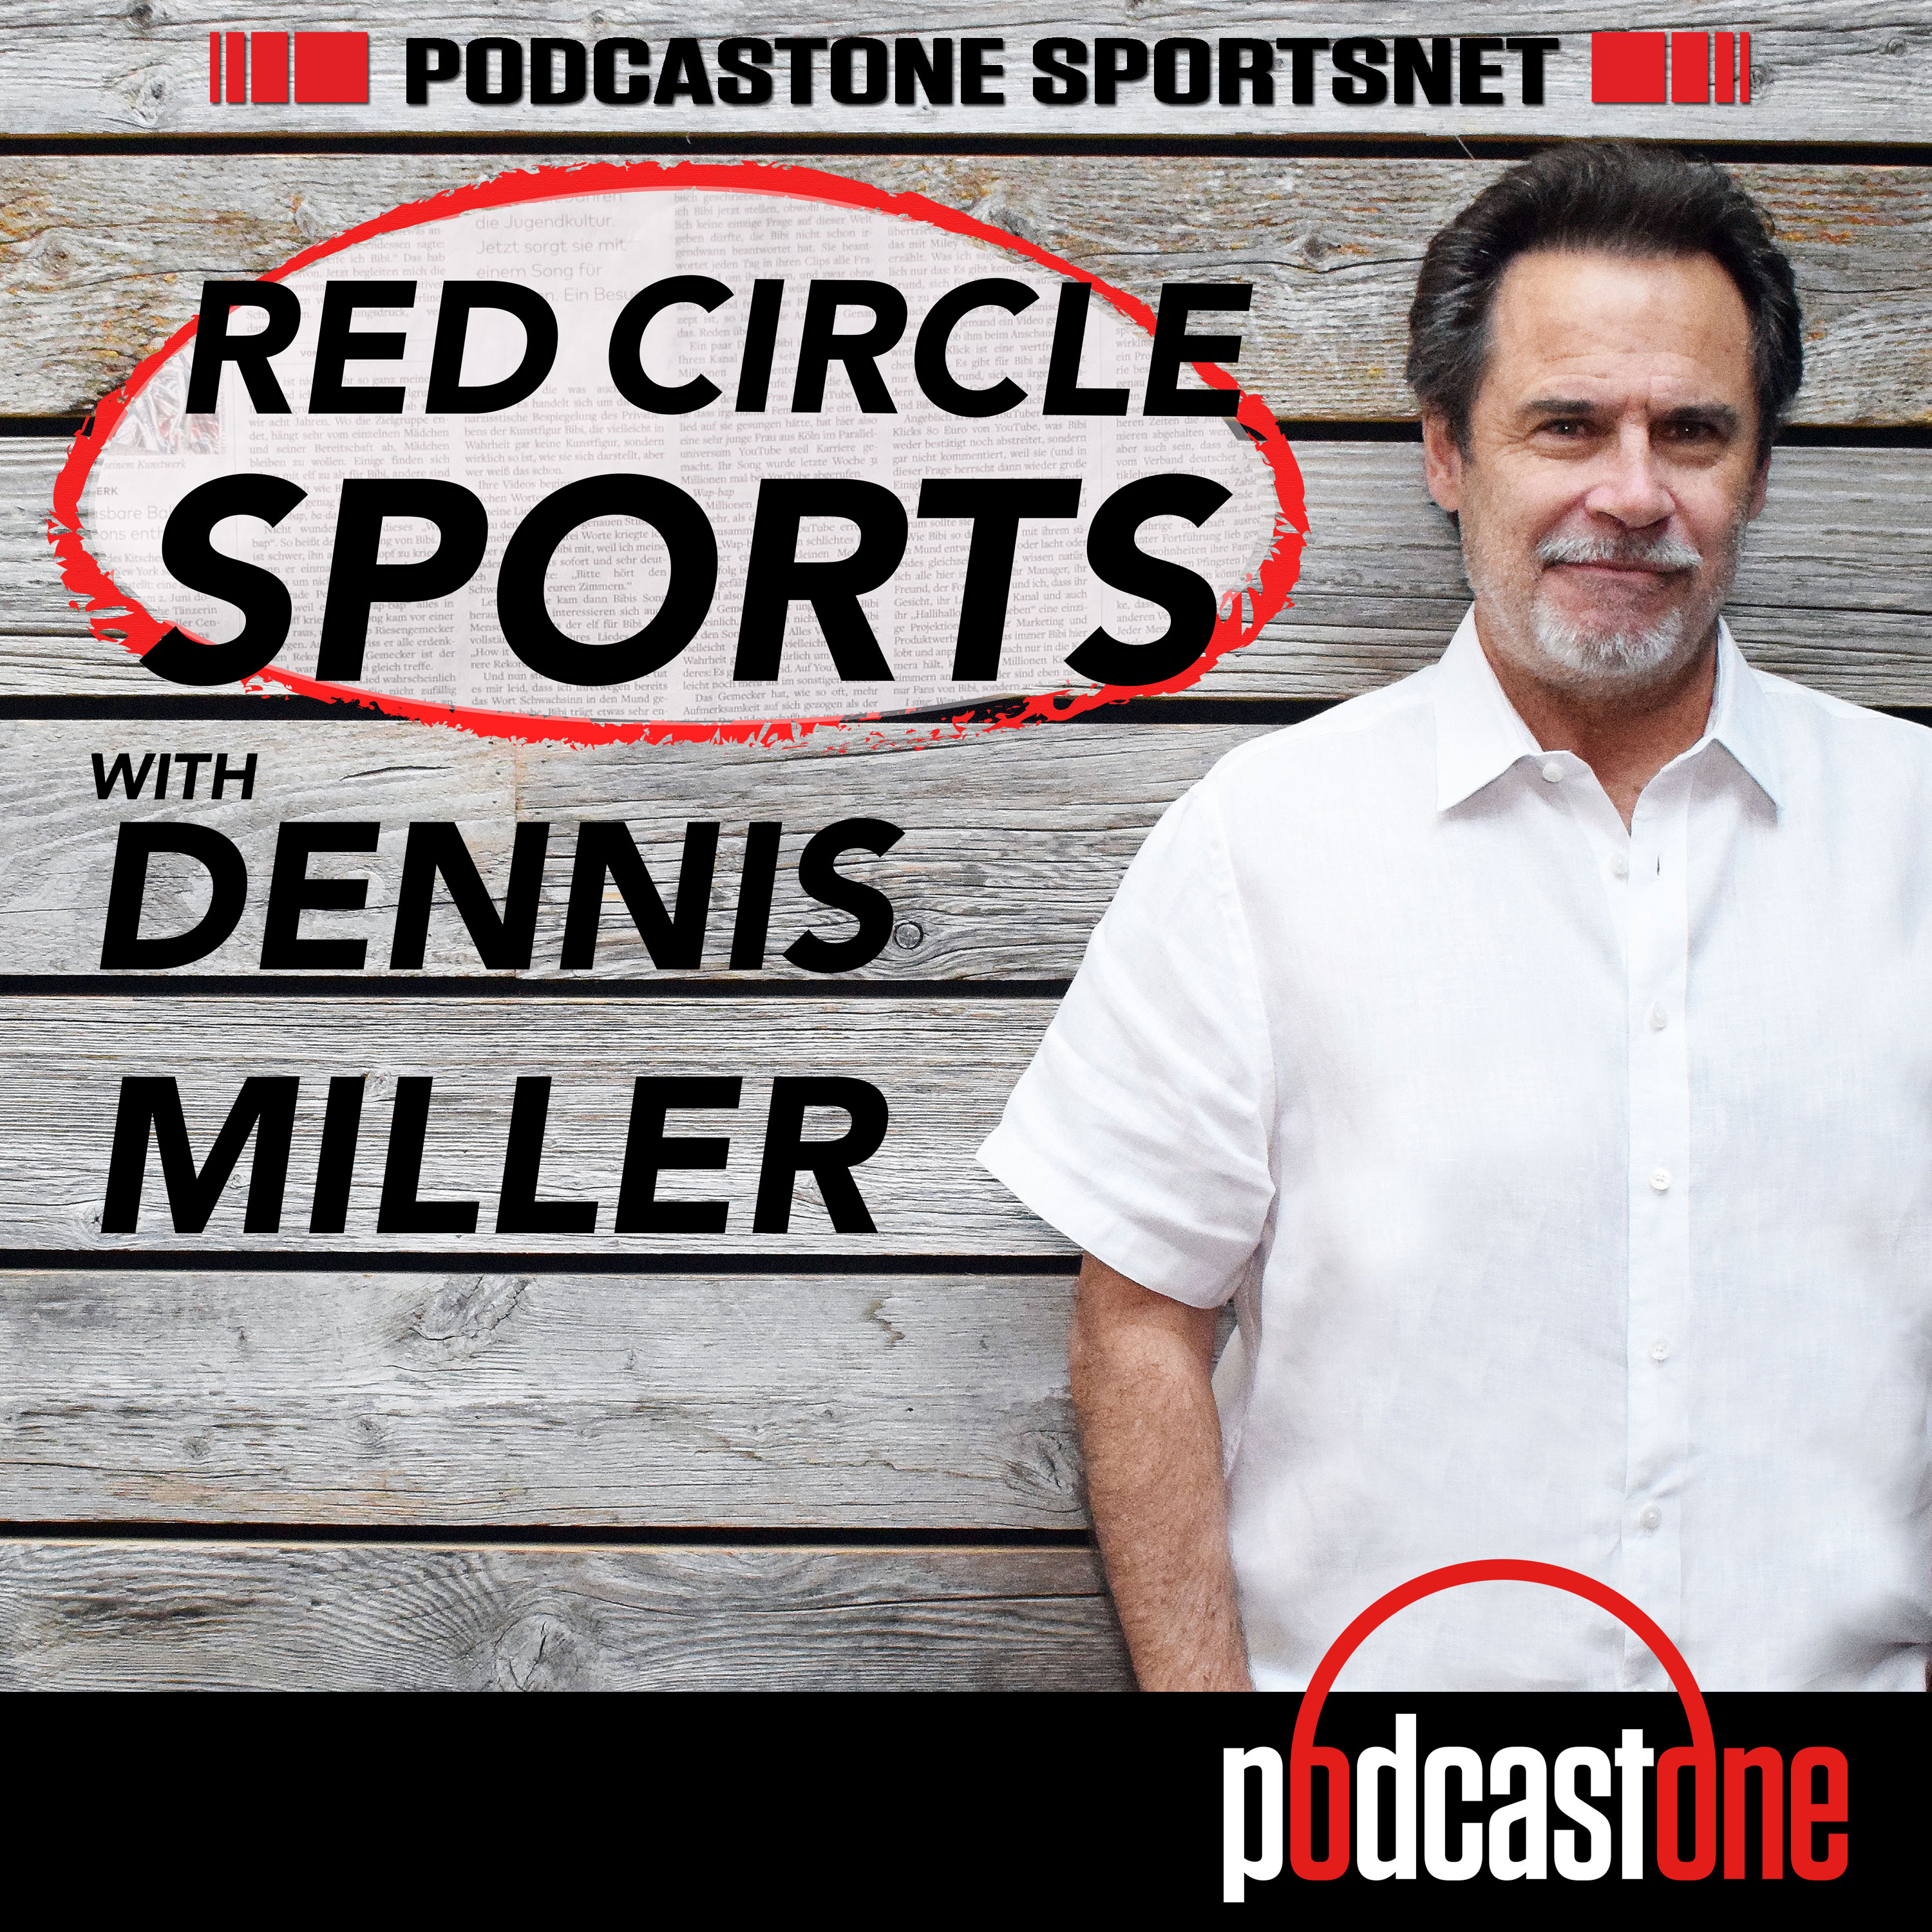 Red Circle Sports with Dennis Miller